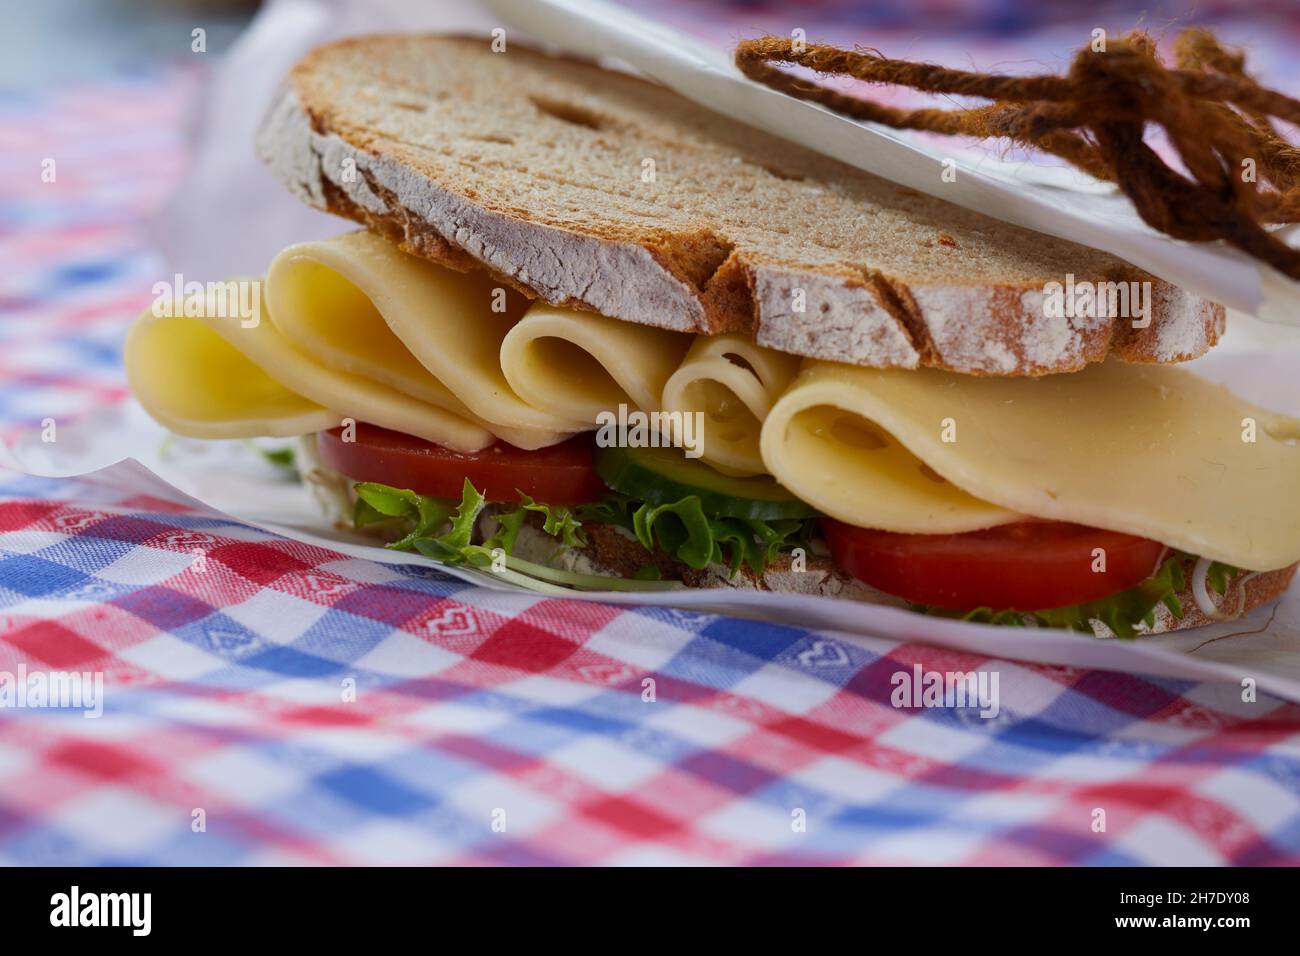 A sandwich made with crusty bread, cheese, tomatoes and salad Stock Photo